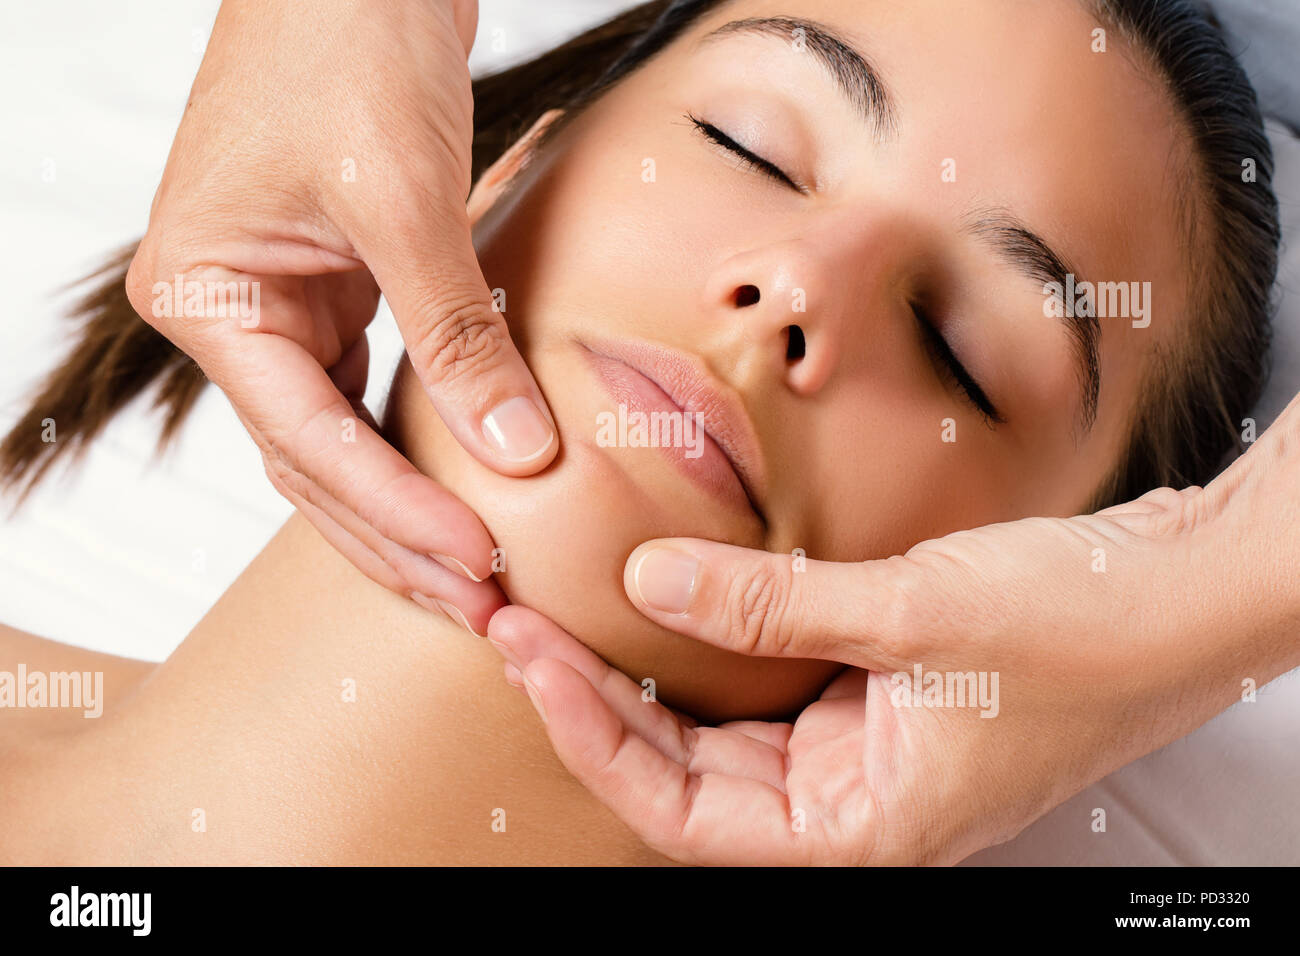 Close up top view portrait of woman at beauty treatment session. Therapist applying cream on chin. Stock Photo